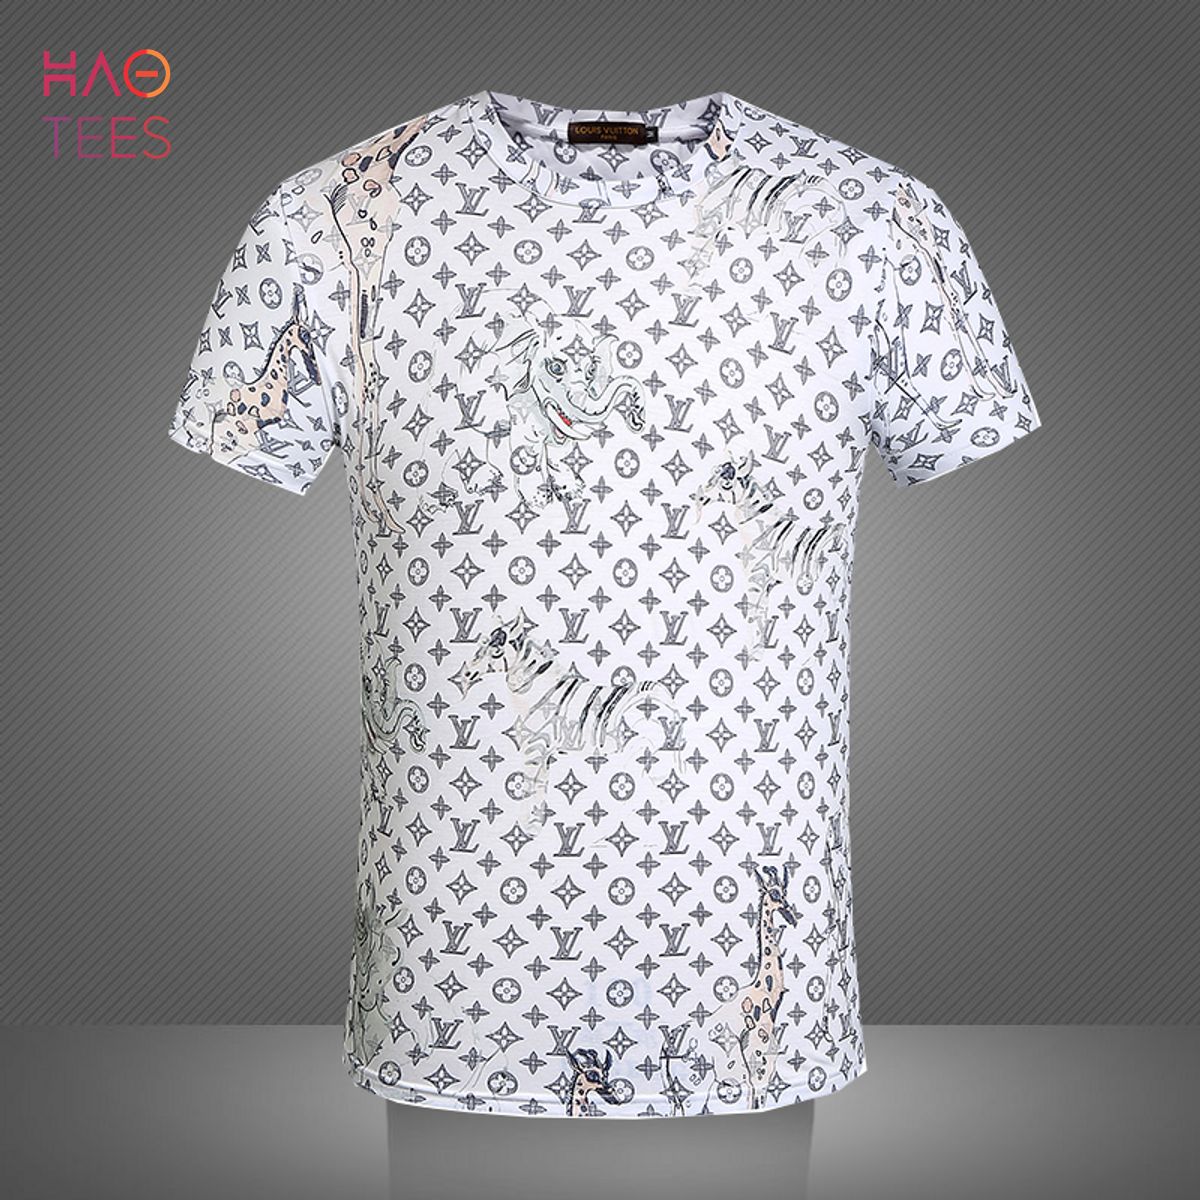 LV Mix Animal 3D T-Shirt Limited Edition